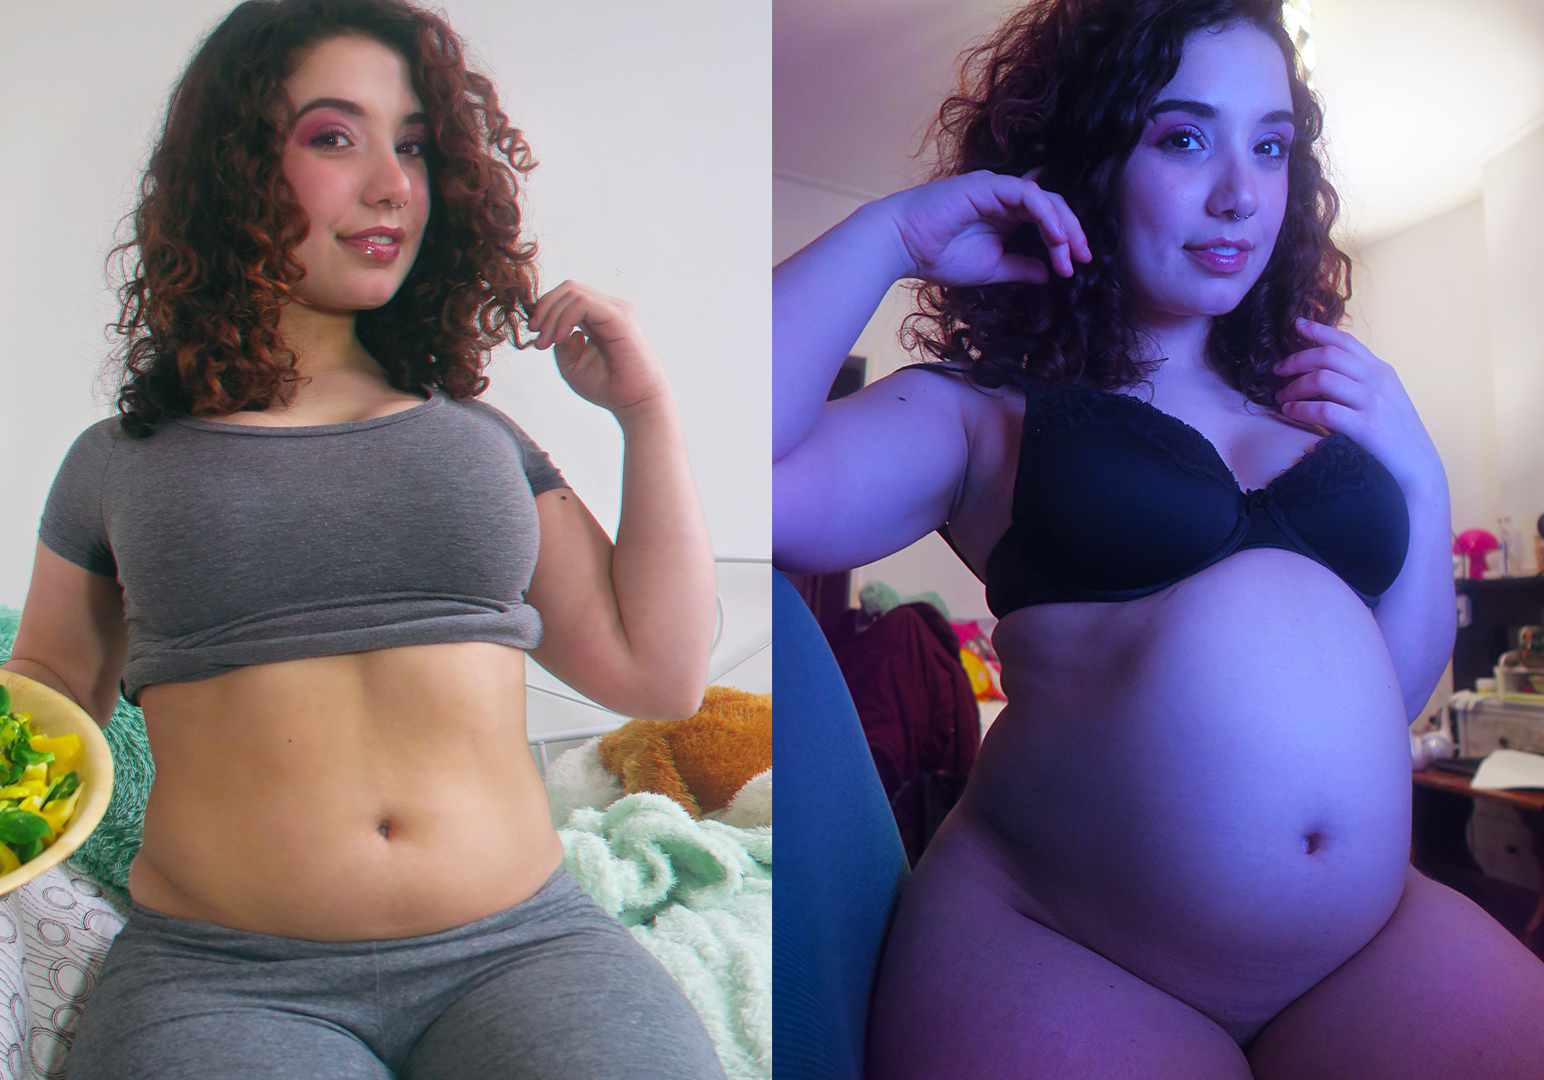 Watch the Photo by mariaalive with the username @mariaalive, who is a star user, posted on March 24, 2018 and the text says 'Before and after of the same night, really in the mood for more Mcdonalds 

 #feedee  #feederism  #weight  #gain  #food  #stuffing  #maria  #alive  #mariaphilia  #thick  #girl  #foodbaby  #food  #baby  #fitness  #fail  #diet  #fail'